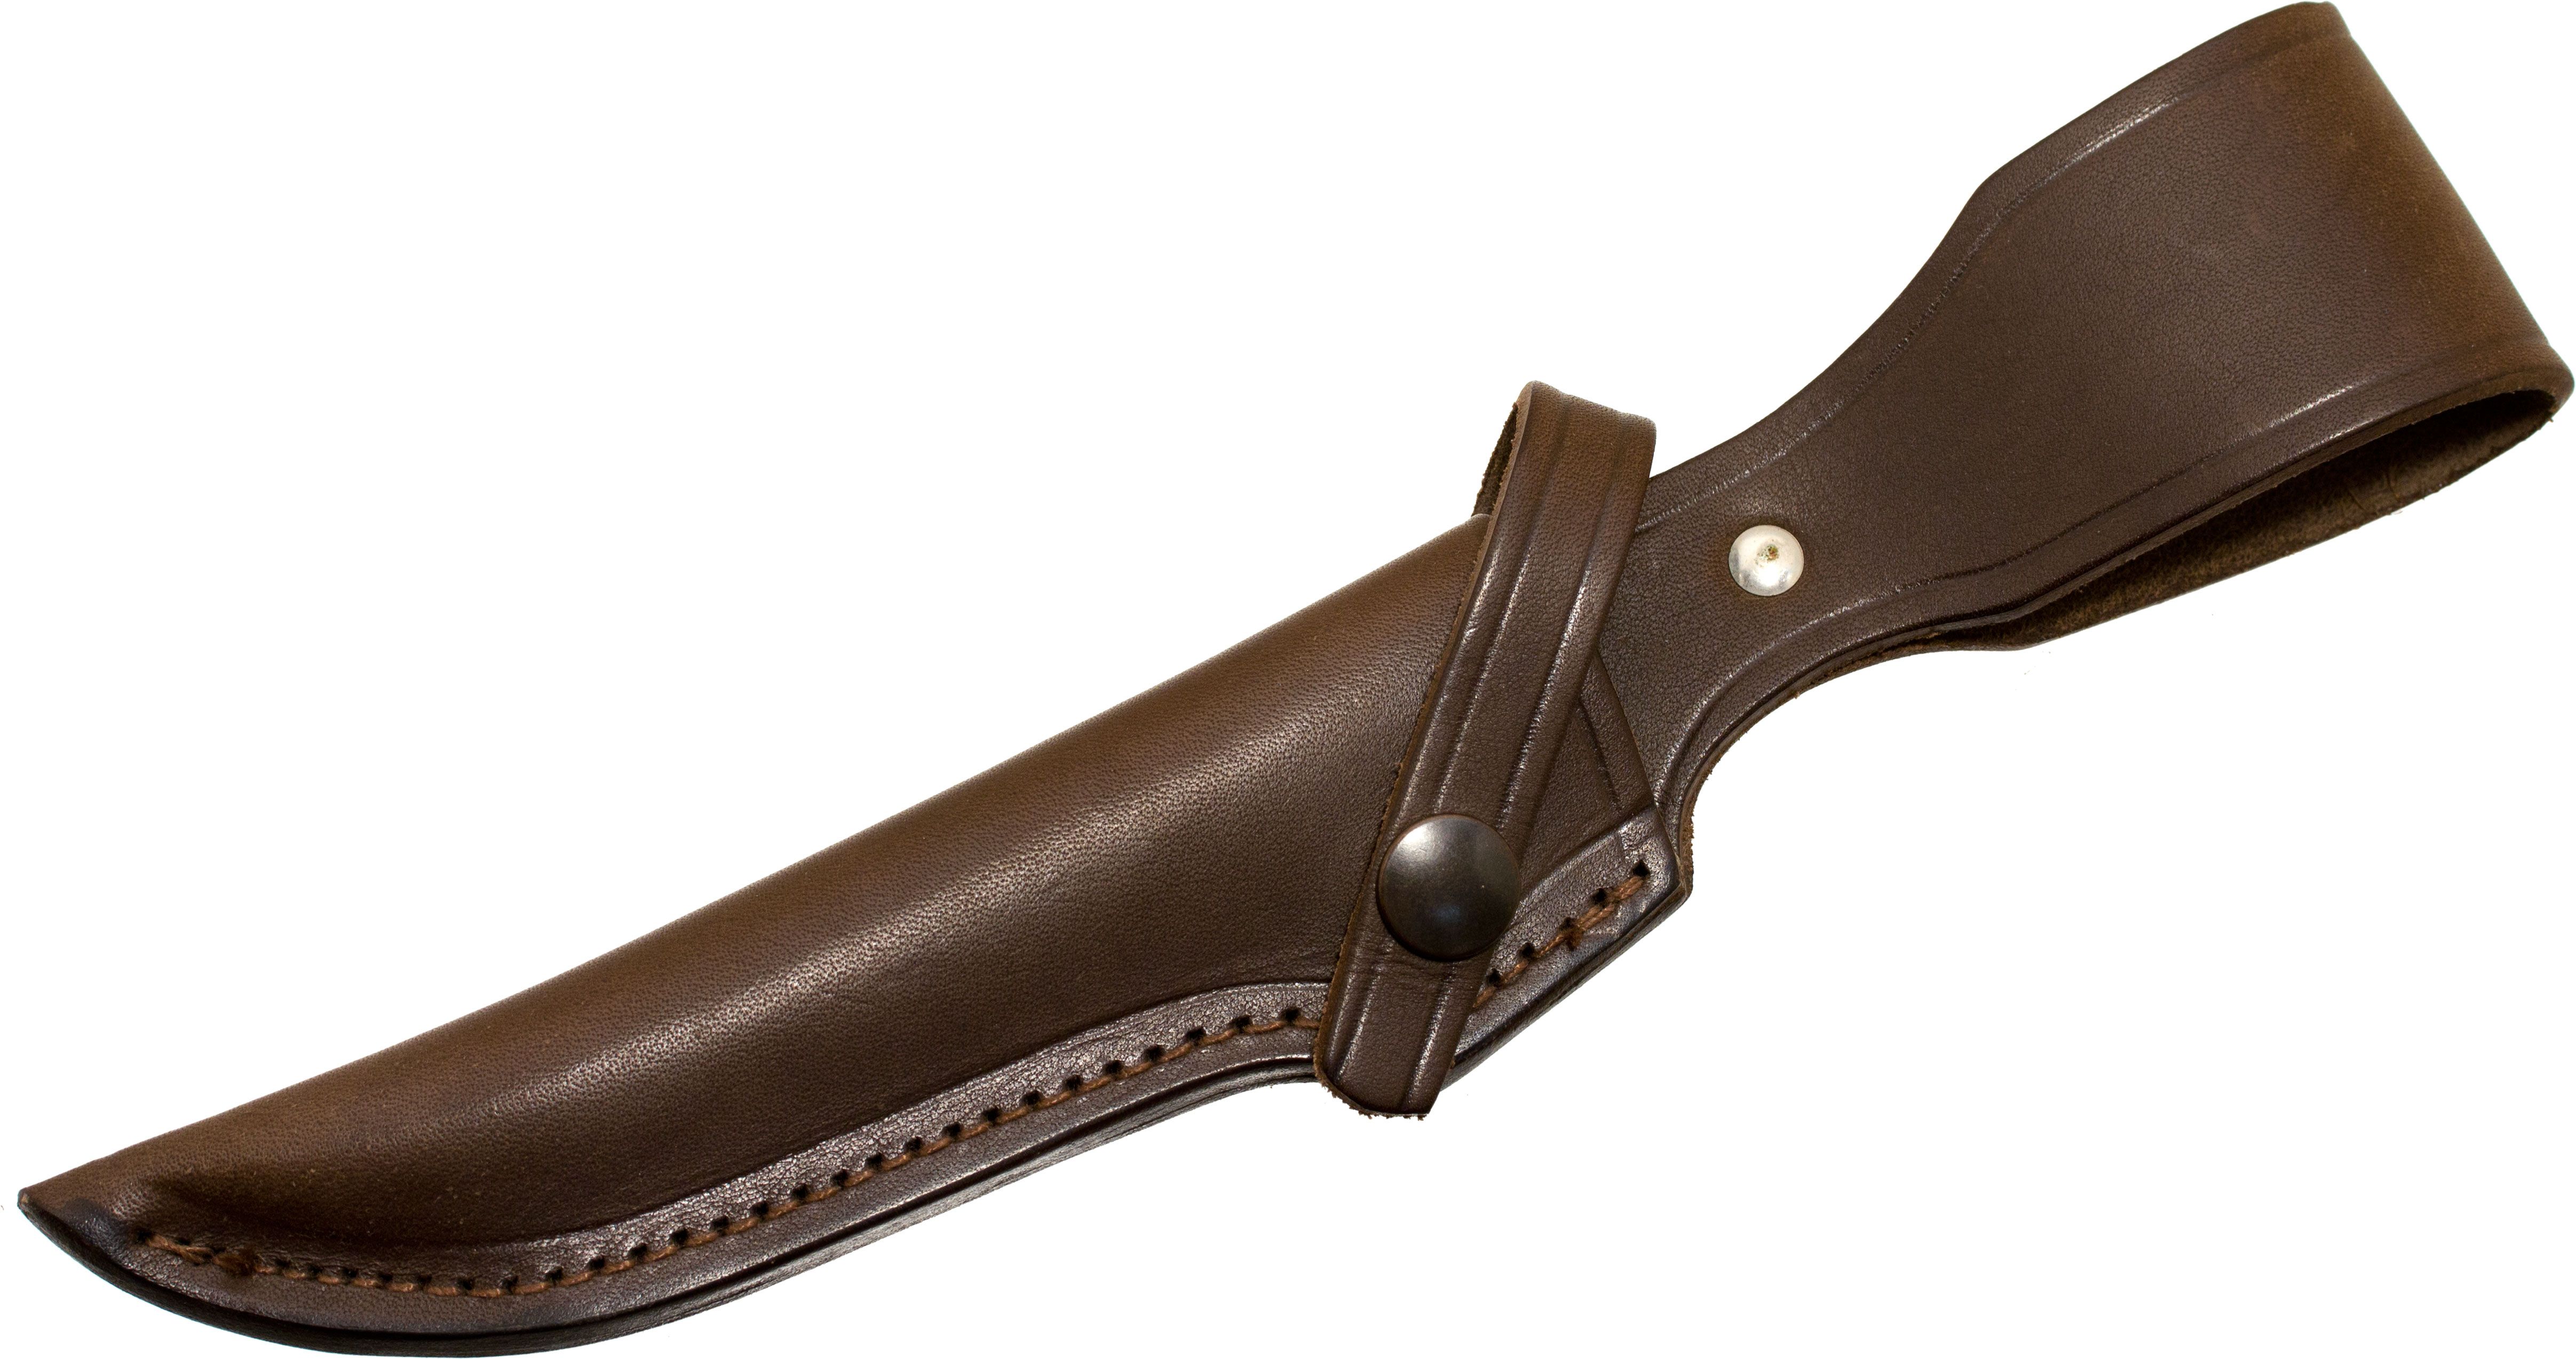 IXL Wostenholm Leather Sheath for 10 Classic Bowie, Sheath Only -  KnifeCenter - IXLLS6010 - Discontinued